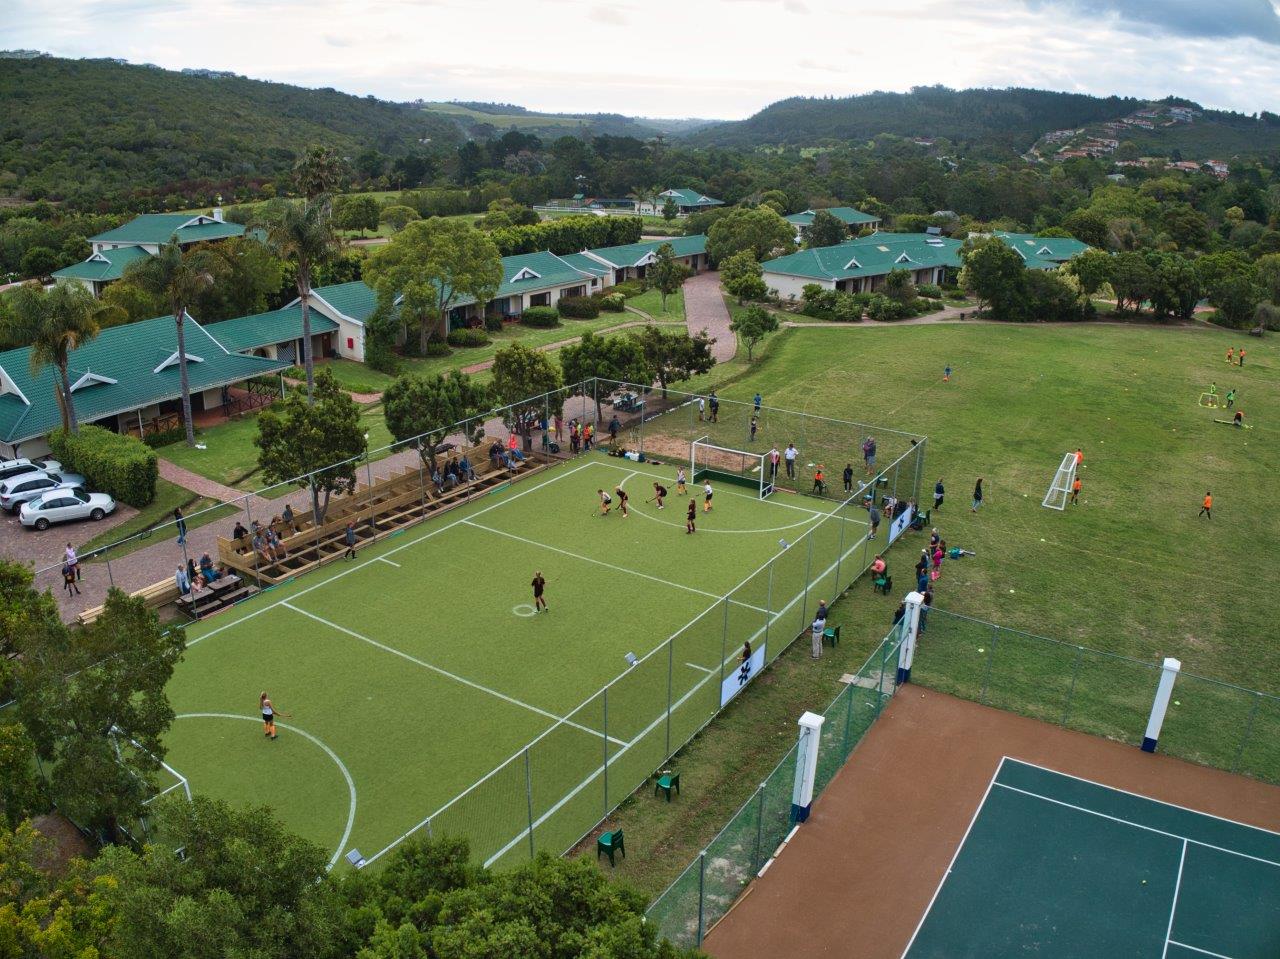 an aerial view of a tennis court and soccer field